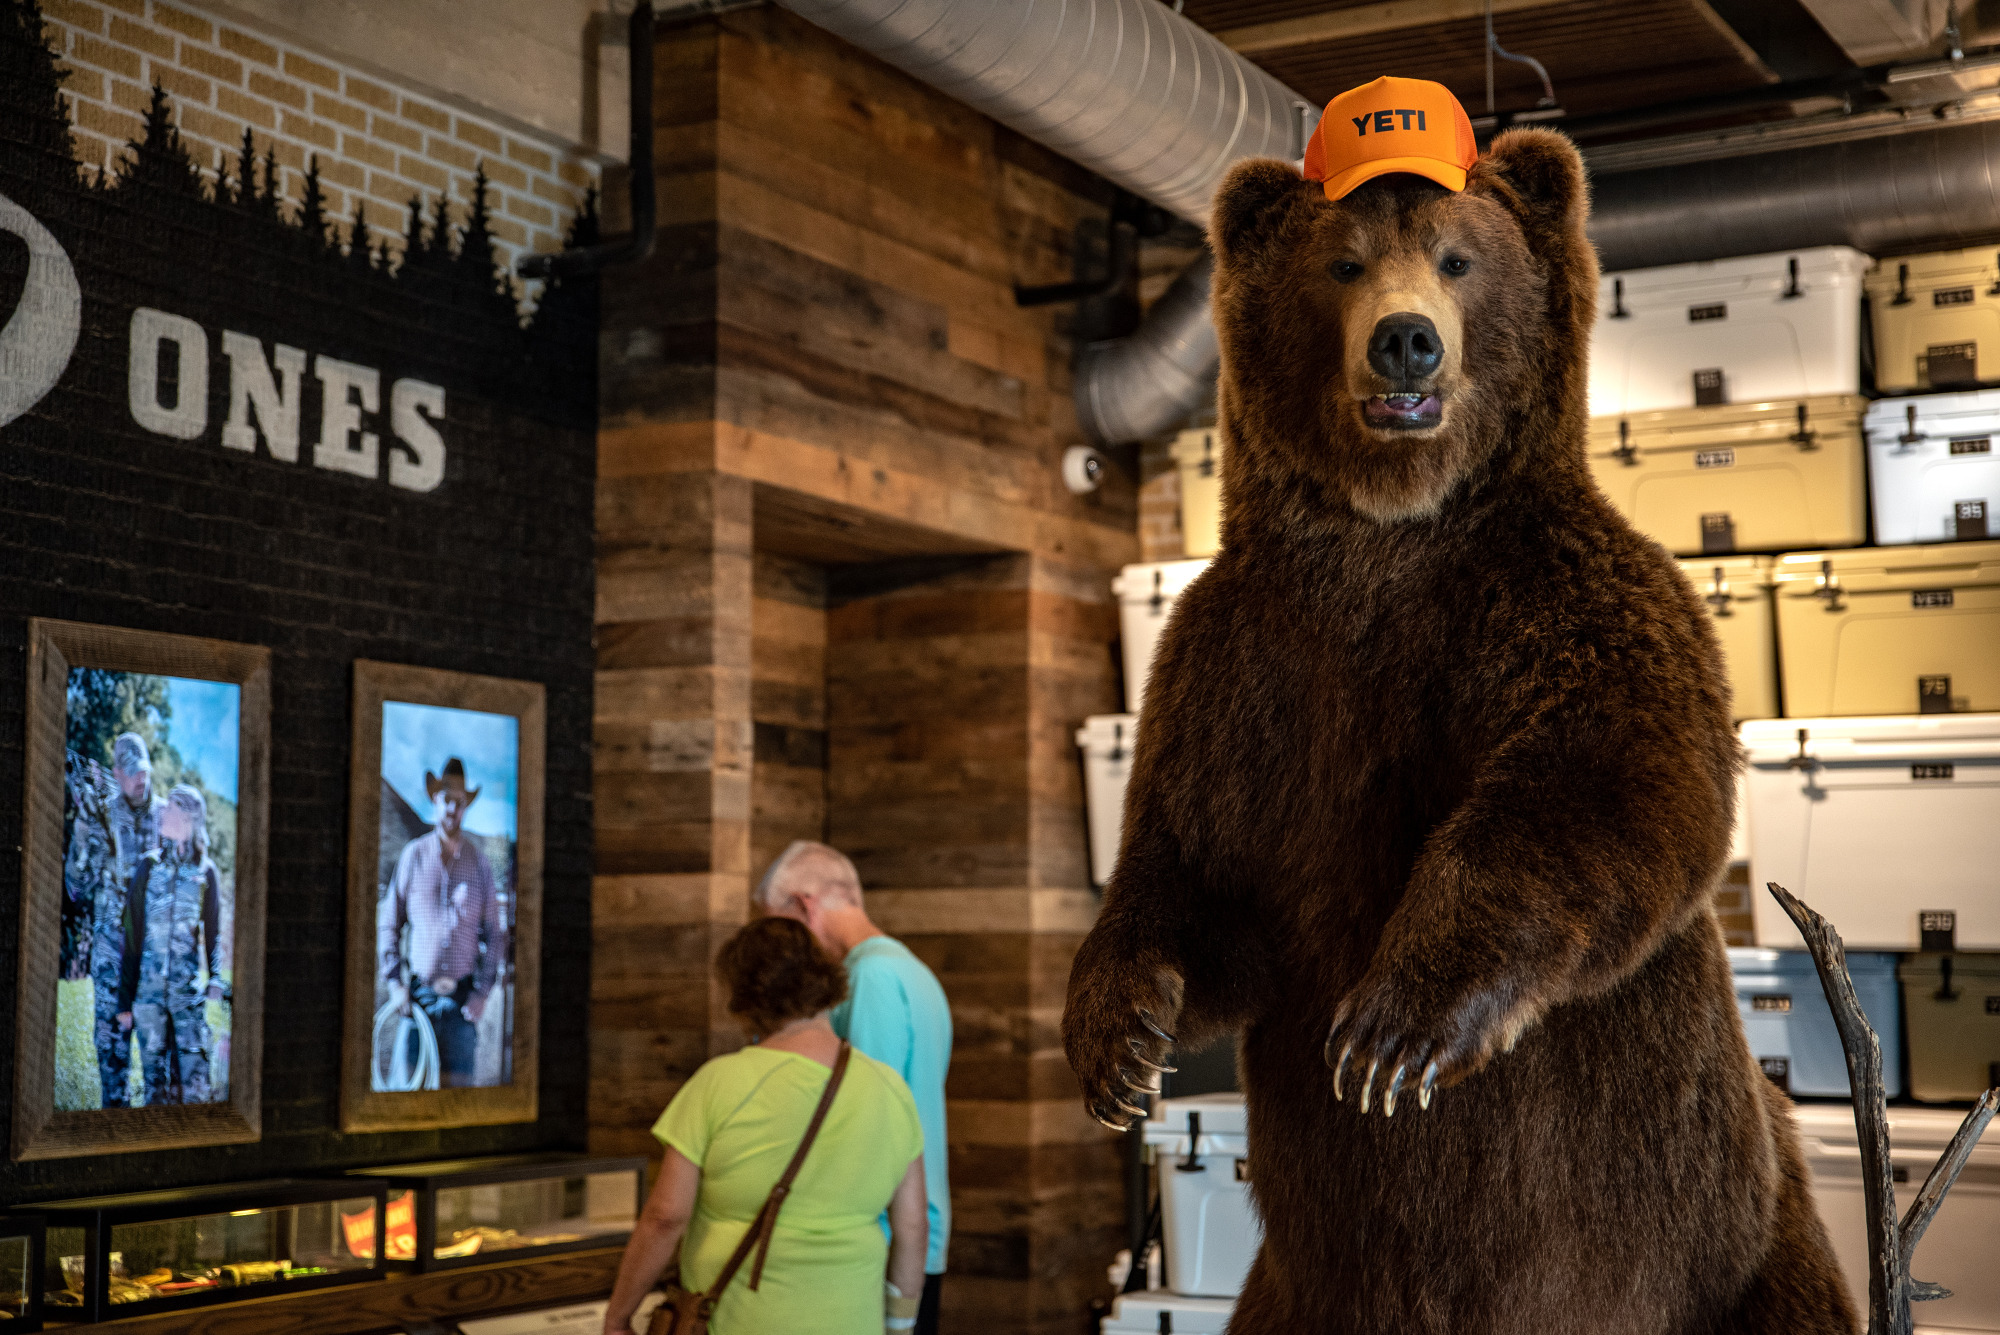 Video: A Look Inside of YETI's Brand New Flagship Store in Austin